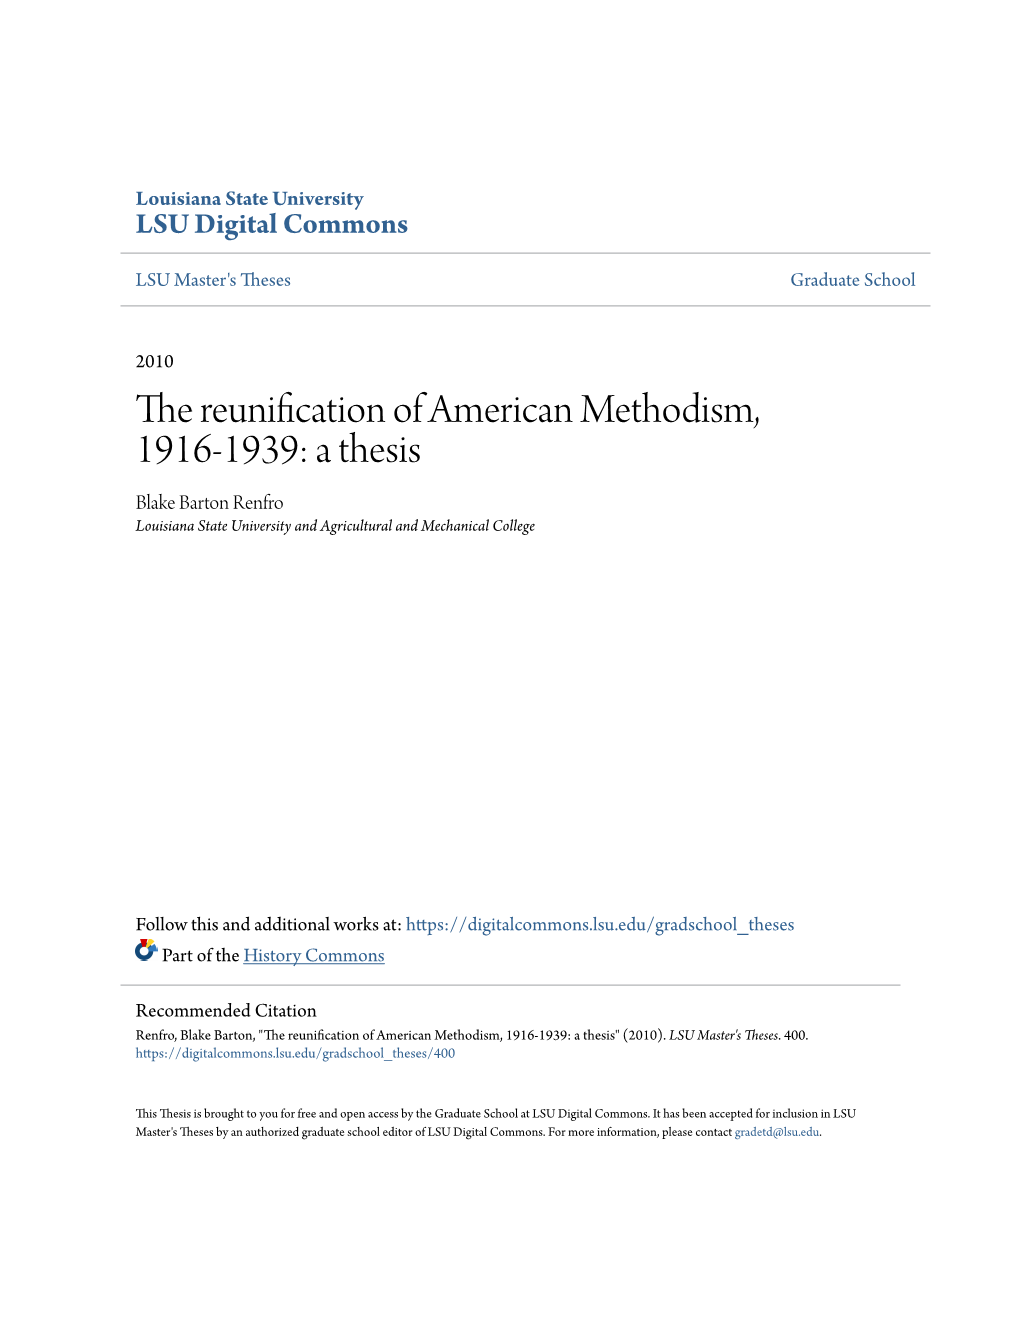 The Reunification of American Methodism, 1916-1939: a Thesis